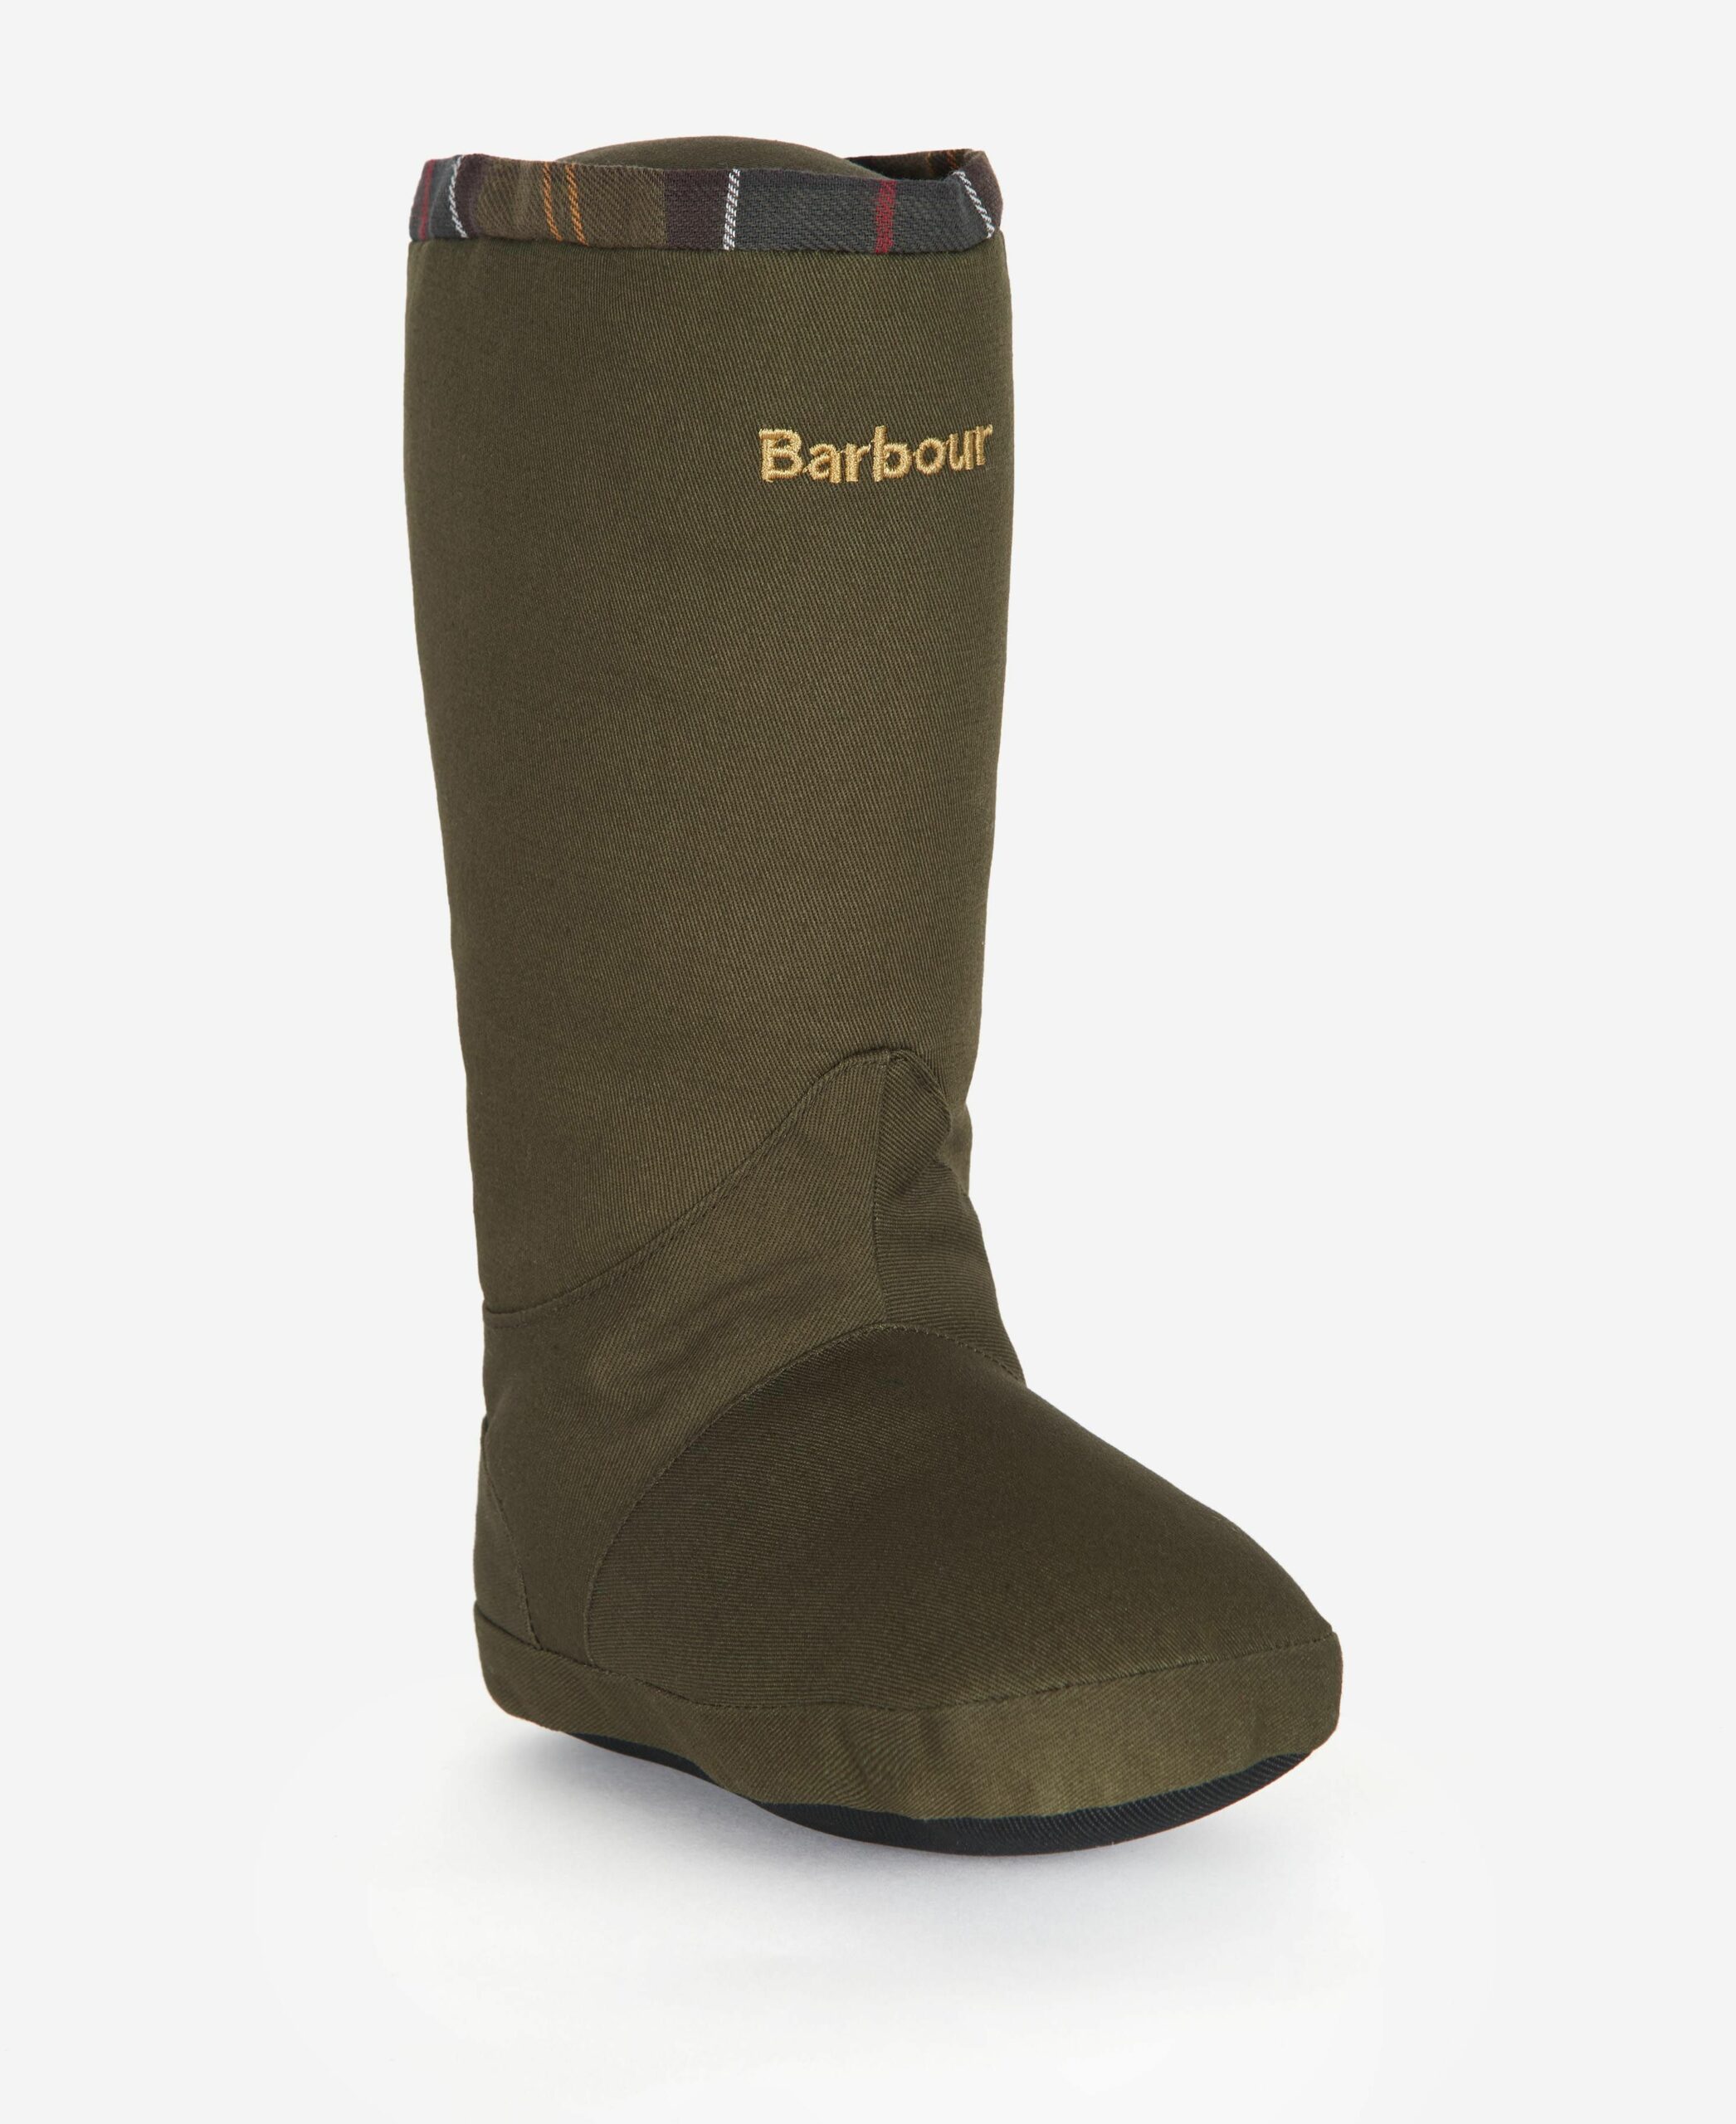 Barbour Welington Boot Dog Toy